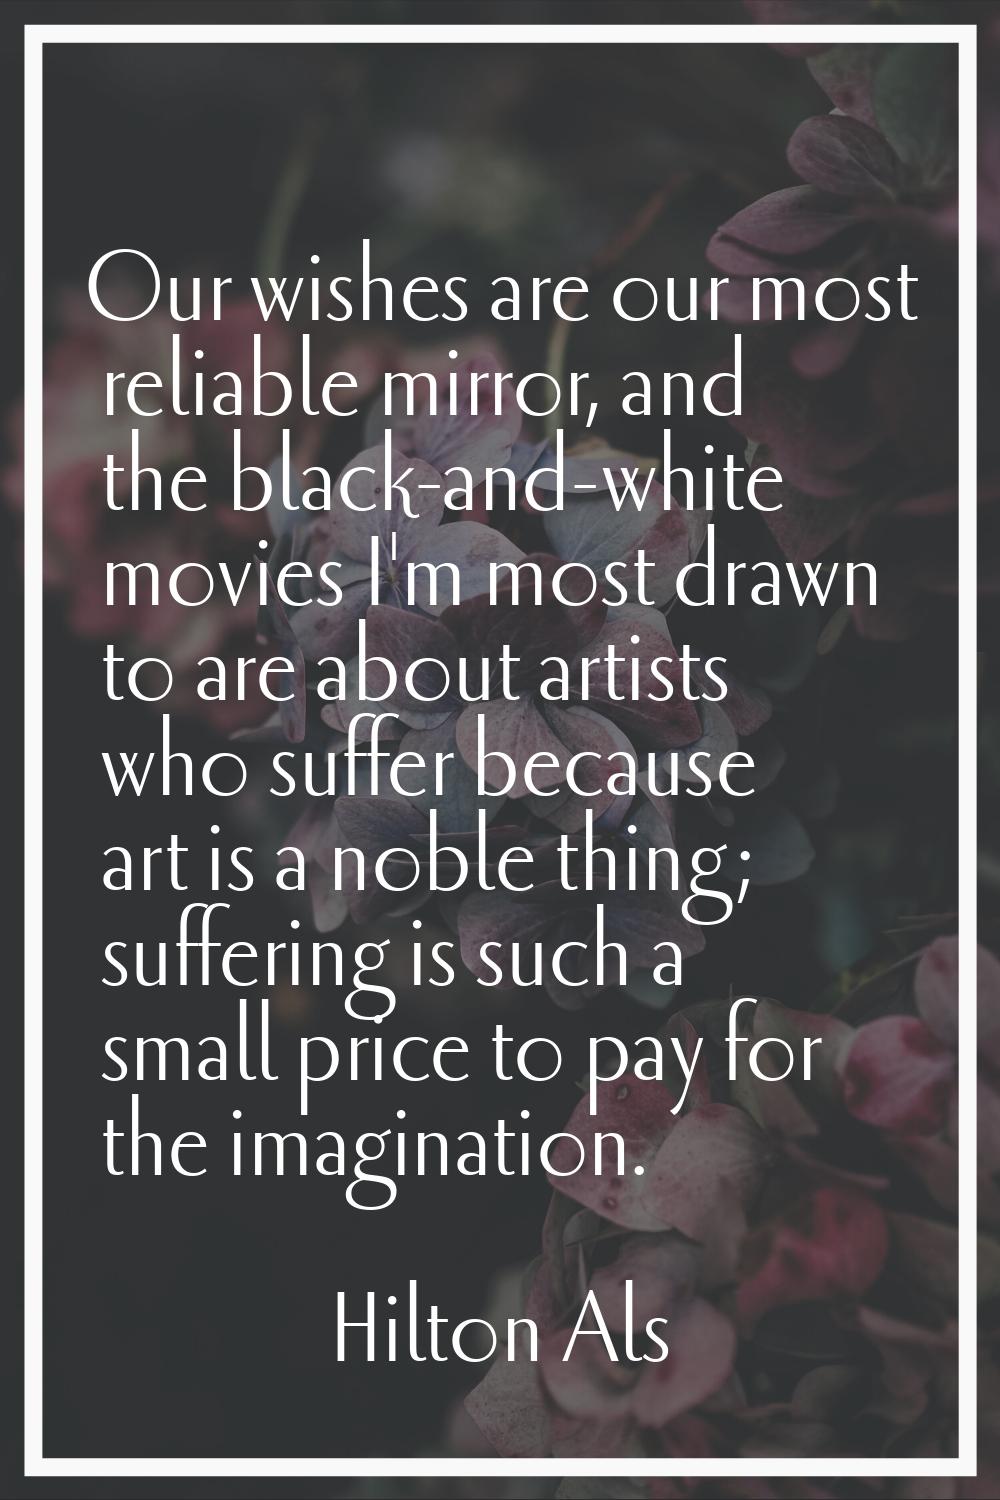 Our wishes are our most reliable mirror, and the black-and-white movies I'm most drawn to are about